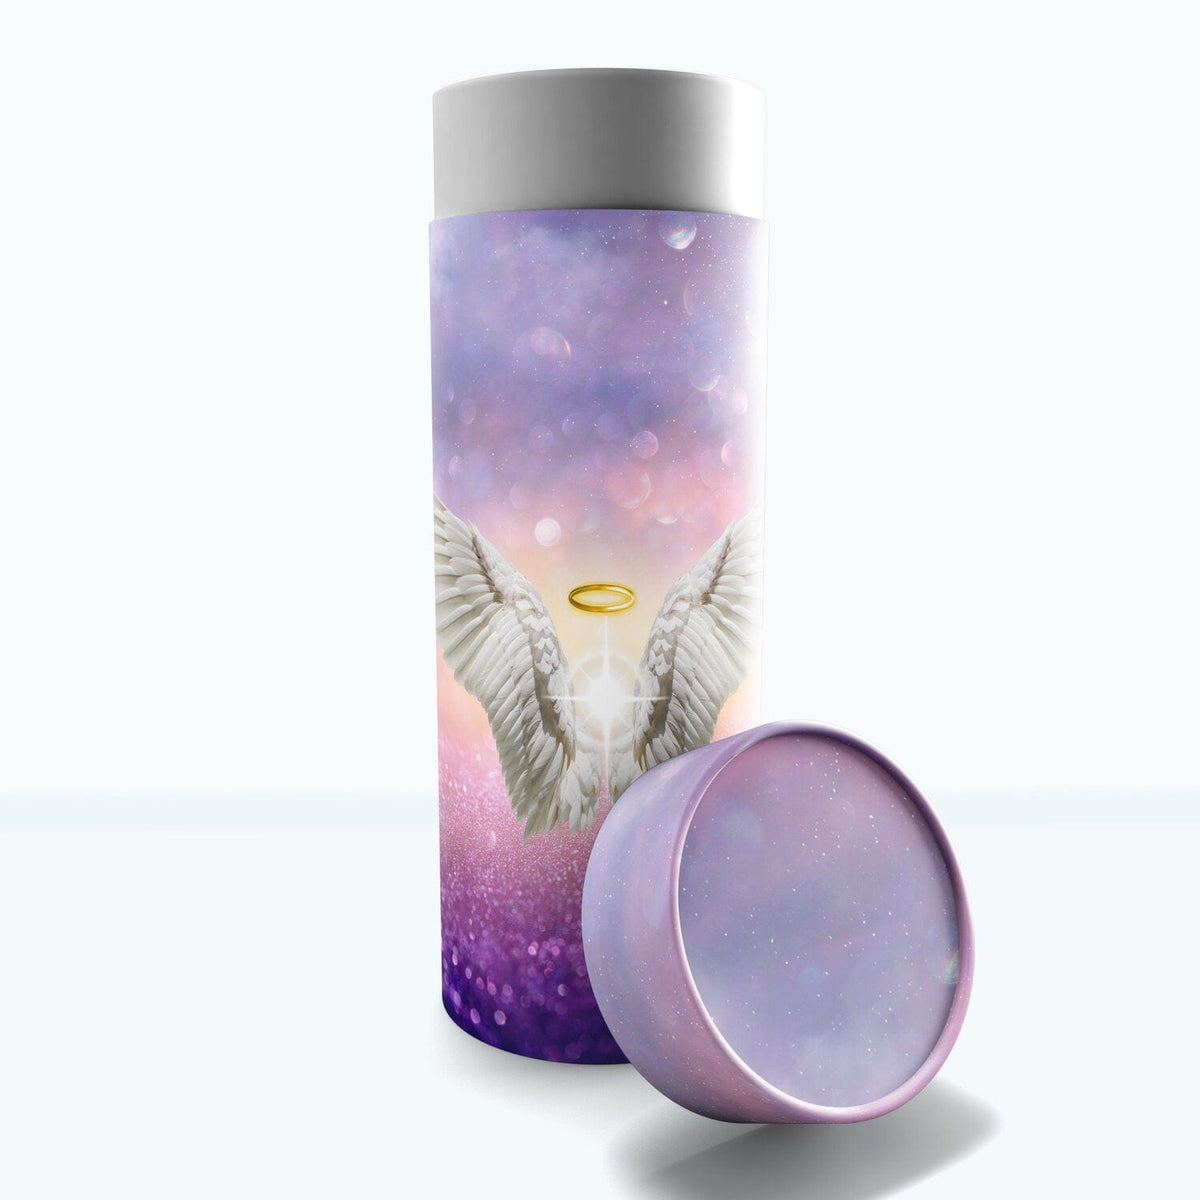 Commemorative Cremation Urns Small Guardian Angel (Purple) - Biodegradable &amp; Eco Friendly Burial or Scattering Urn / Tube